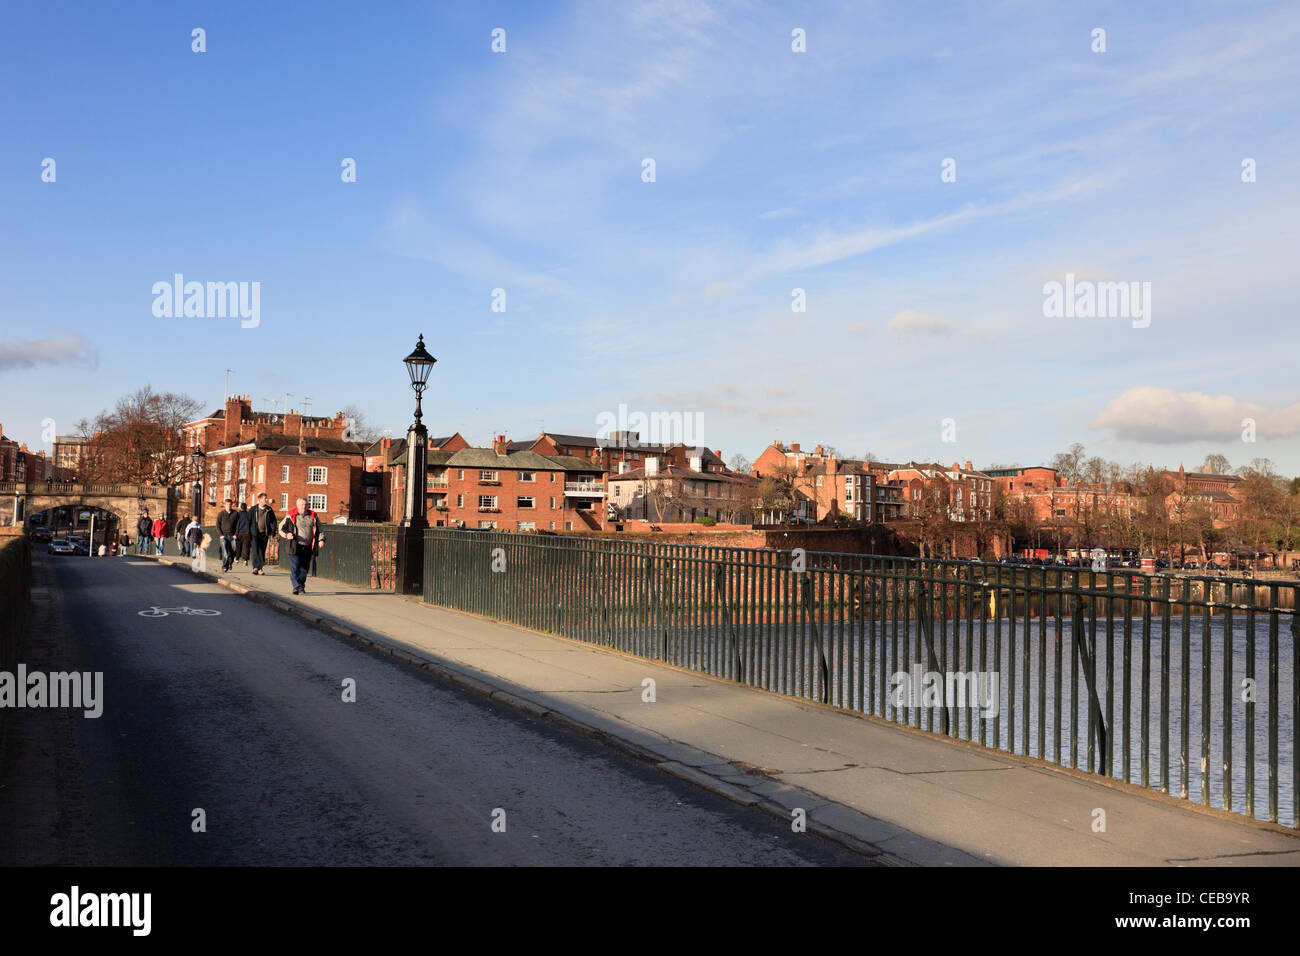 Chester, Cheshire, England, UK. People crossing the Old Dee Bridge across the river from the city Stock Photo